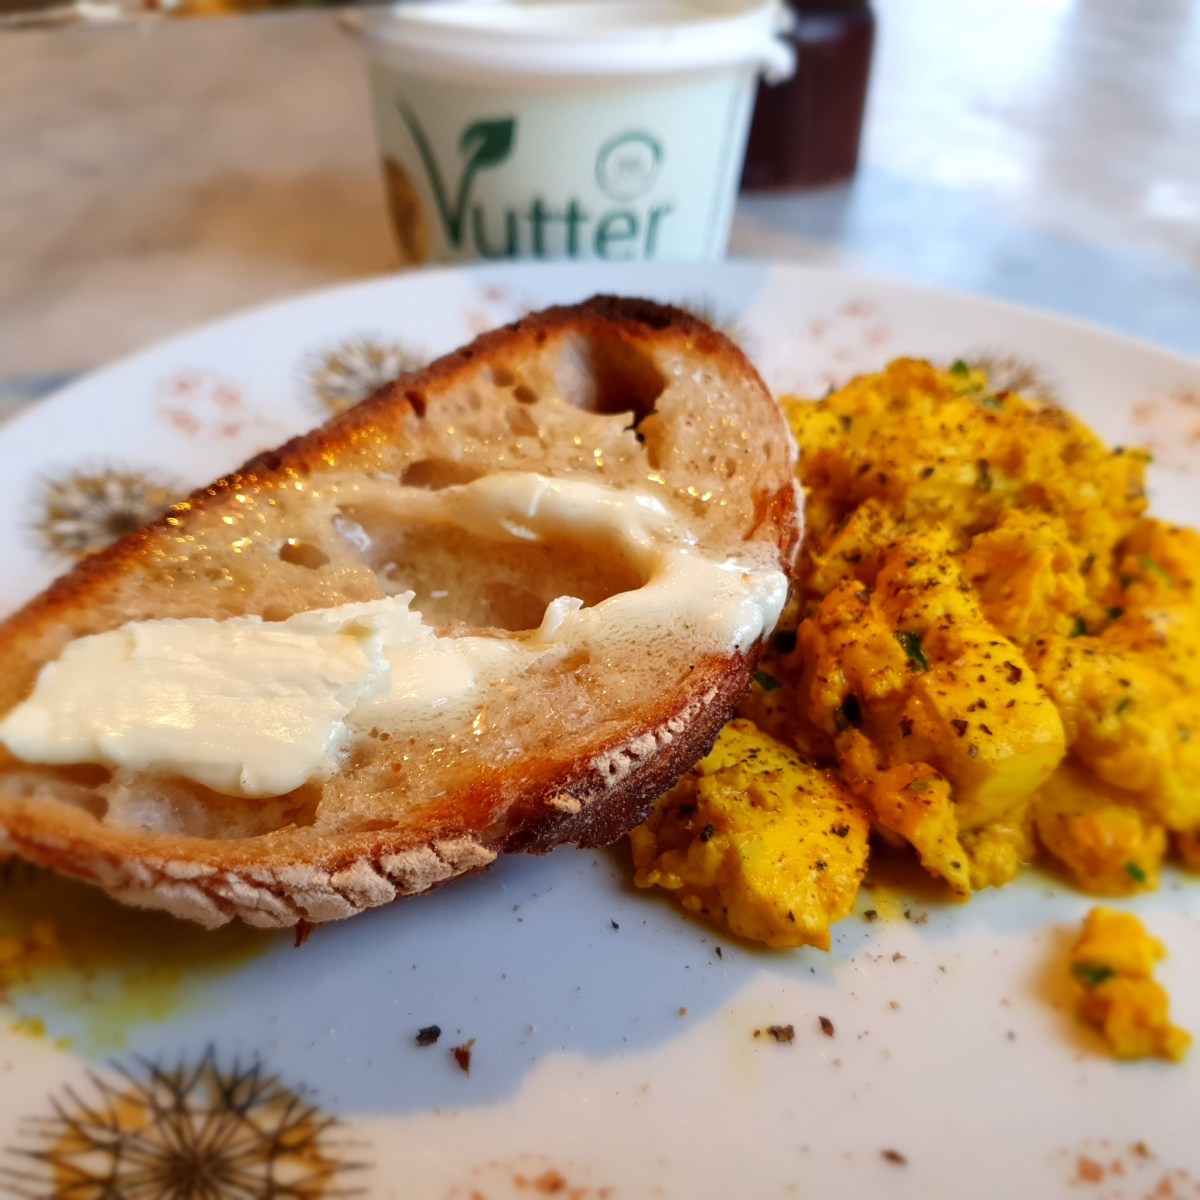 New Zealand-based start-up Feliz Wholefoods is exploring expanding sales of its plant-based Vutter product to the Australian market.